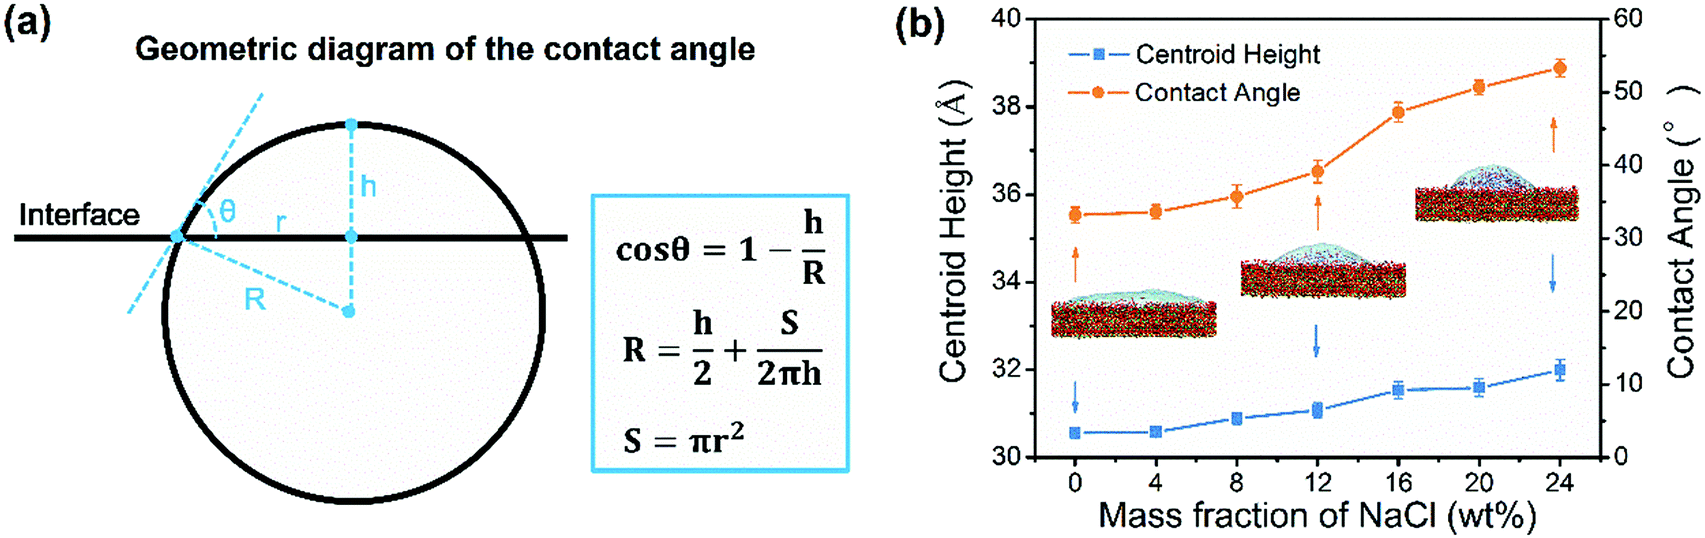 Concentration Induced Wettability Alteration Of Nanoscale Nacl Solution Droplets On The Csh Surface Physical Chemistry Chemical Physics Rsc Publishing Doi 10 1039 D0cp06270g